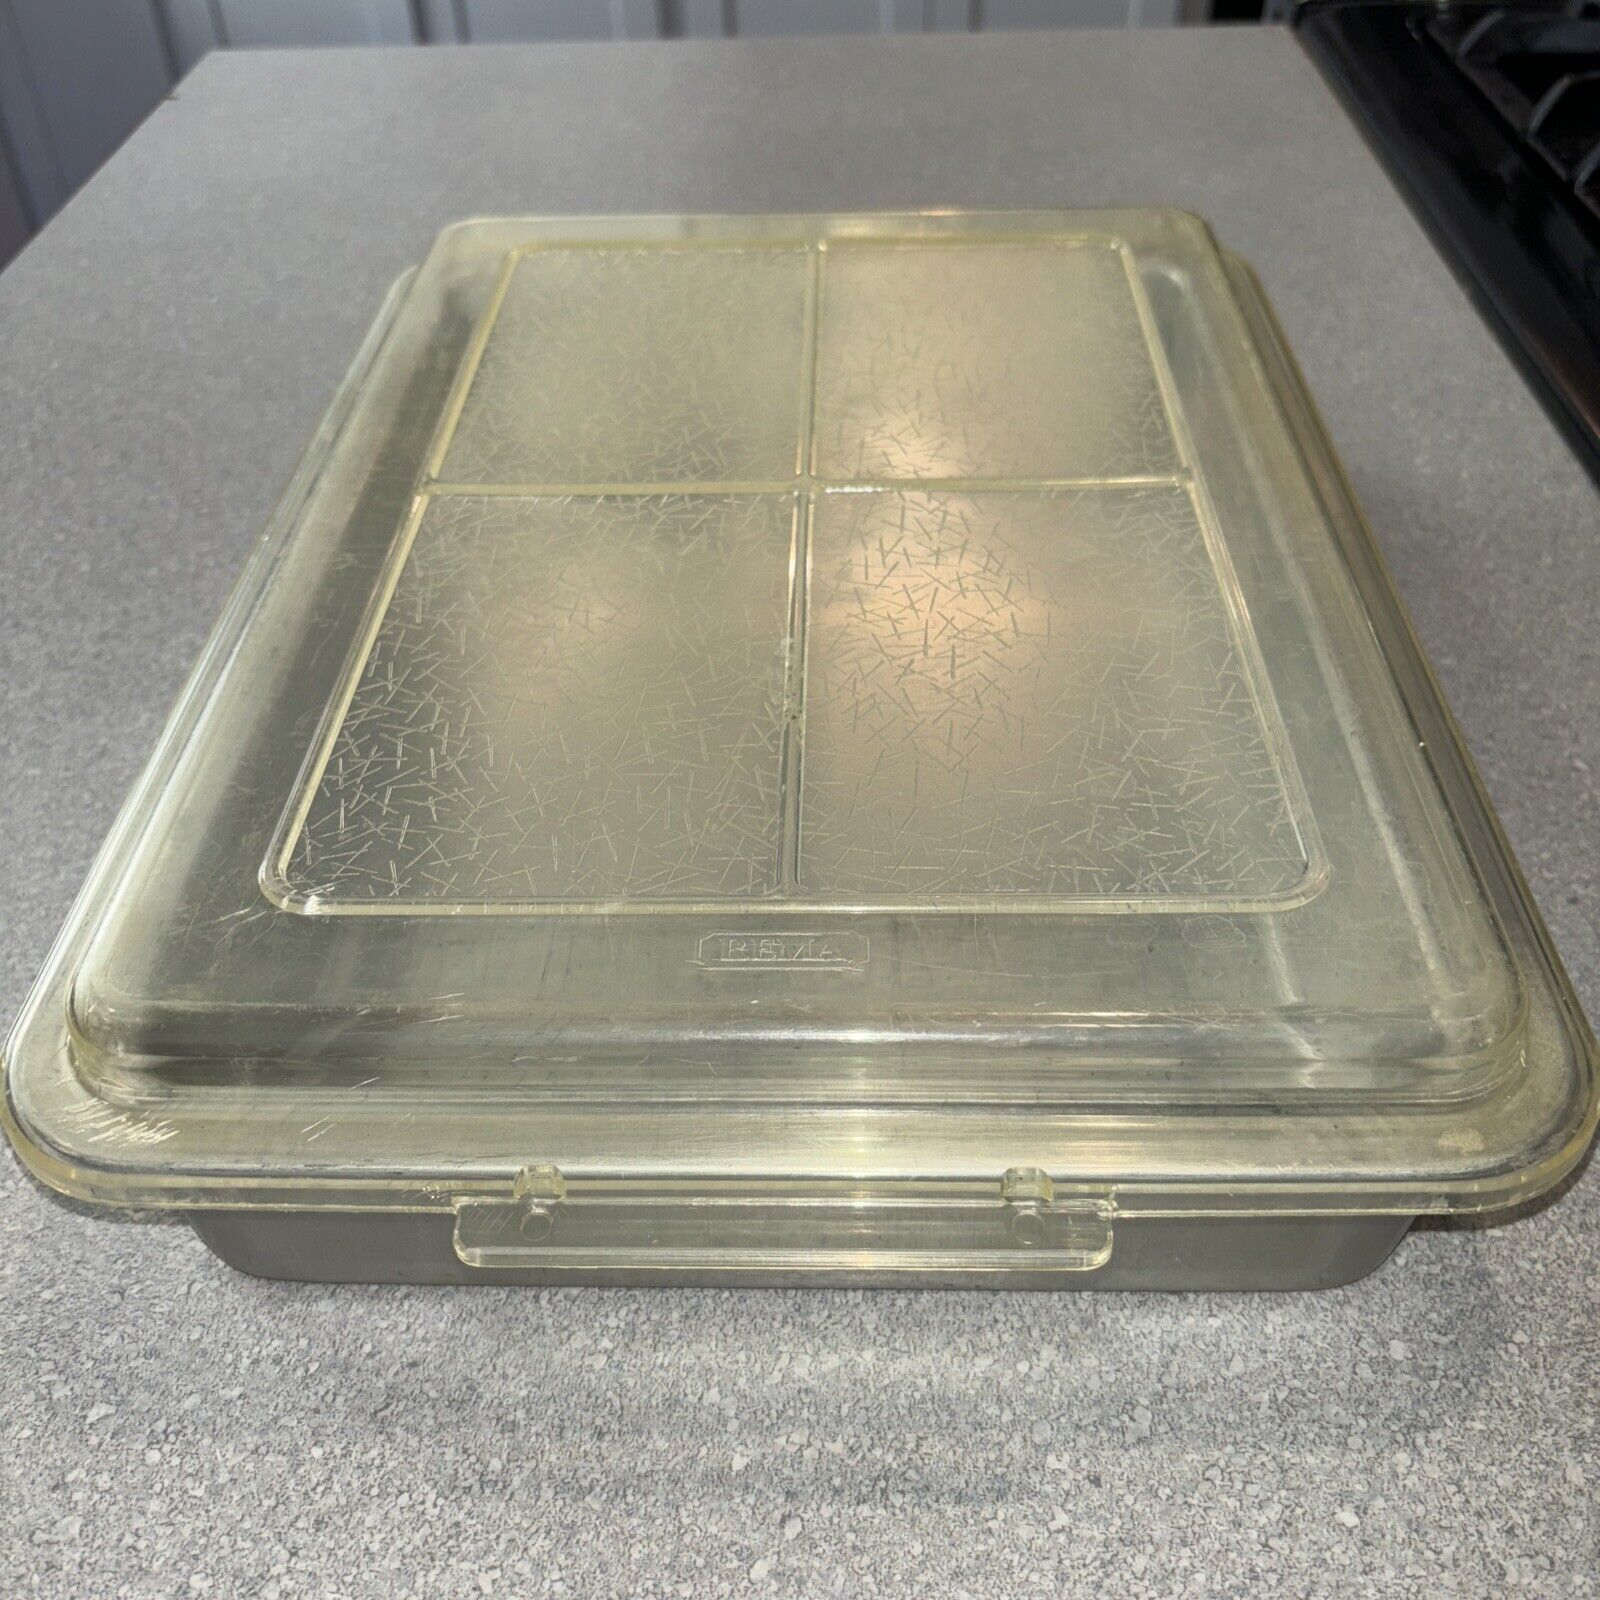 Vintage Rema Air Bake Double Wall Insulated Aluminum 9x13x2 1/4 Baking Pan w/Lid